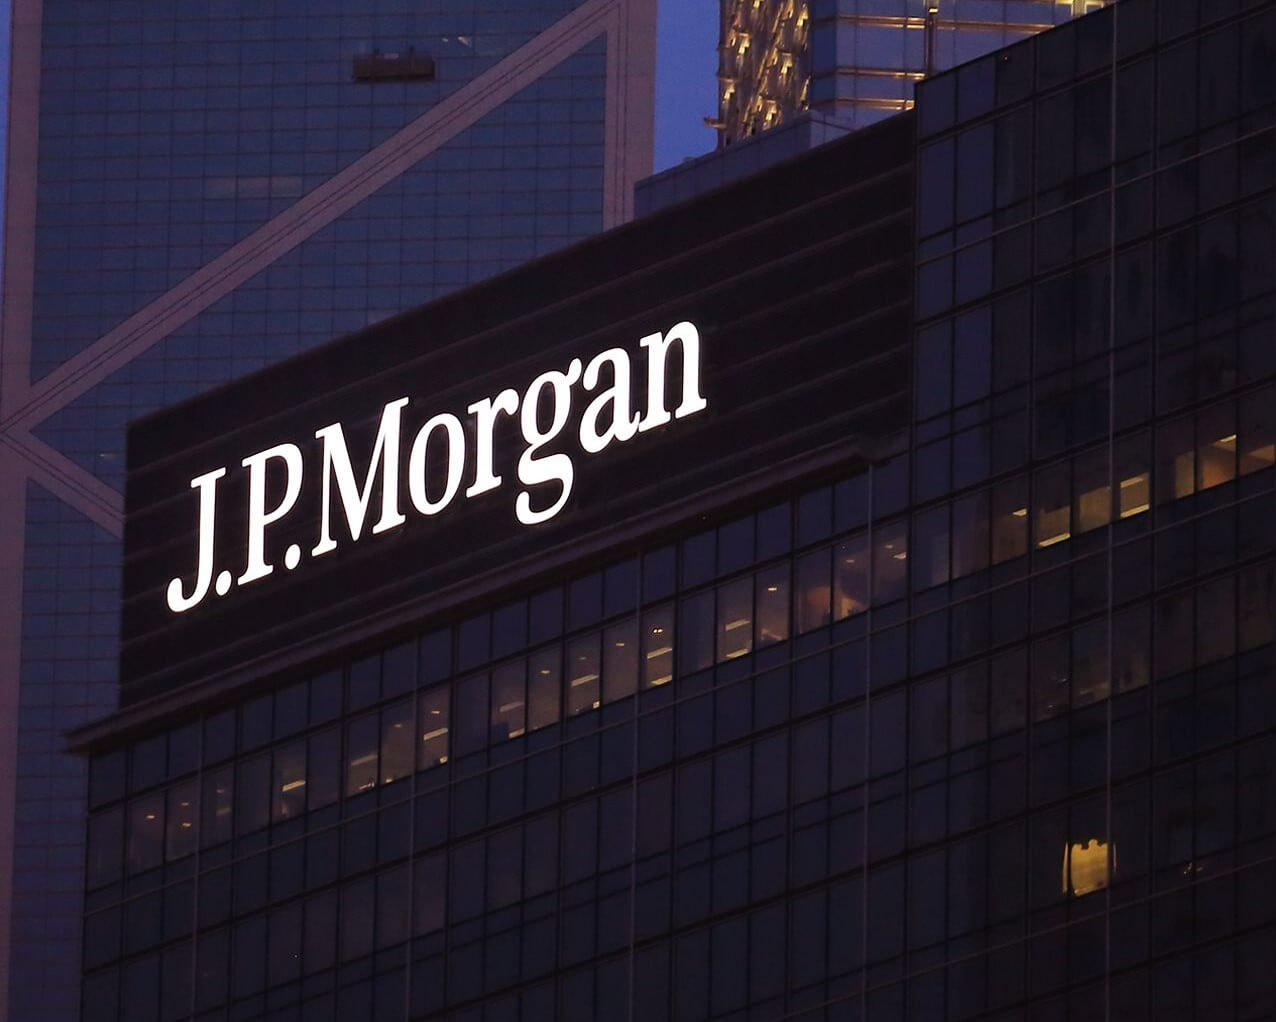 REVAMPED RECRUITMENT STANDARDS FOR J.P MORGAN TO HELP RECRUIT YOUNG BLOOD